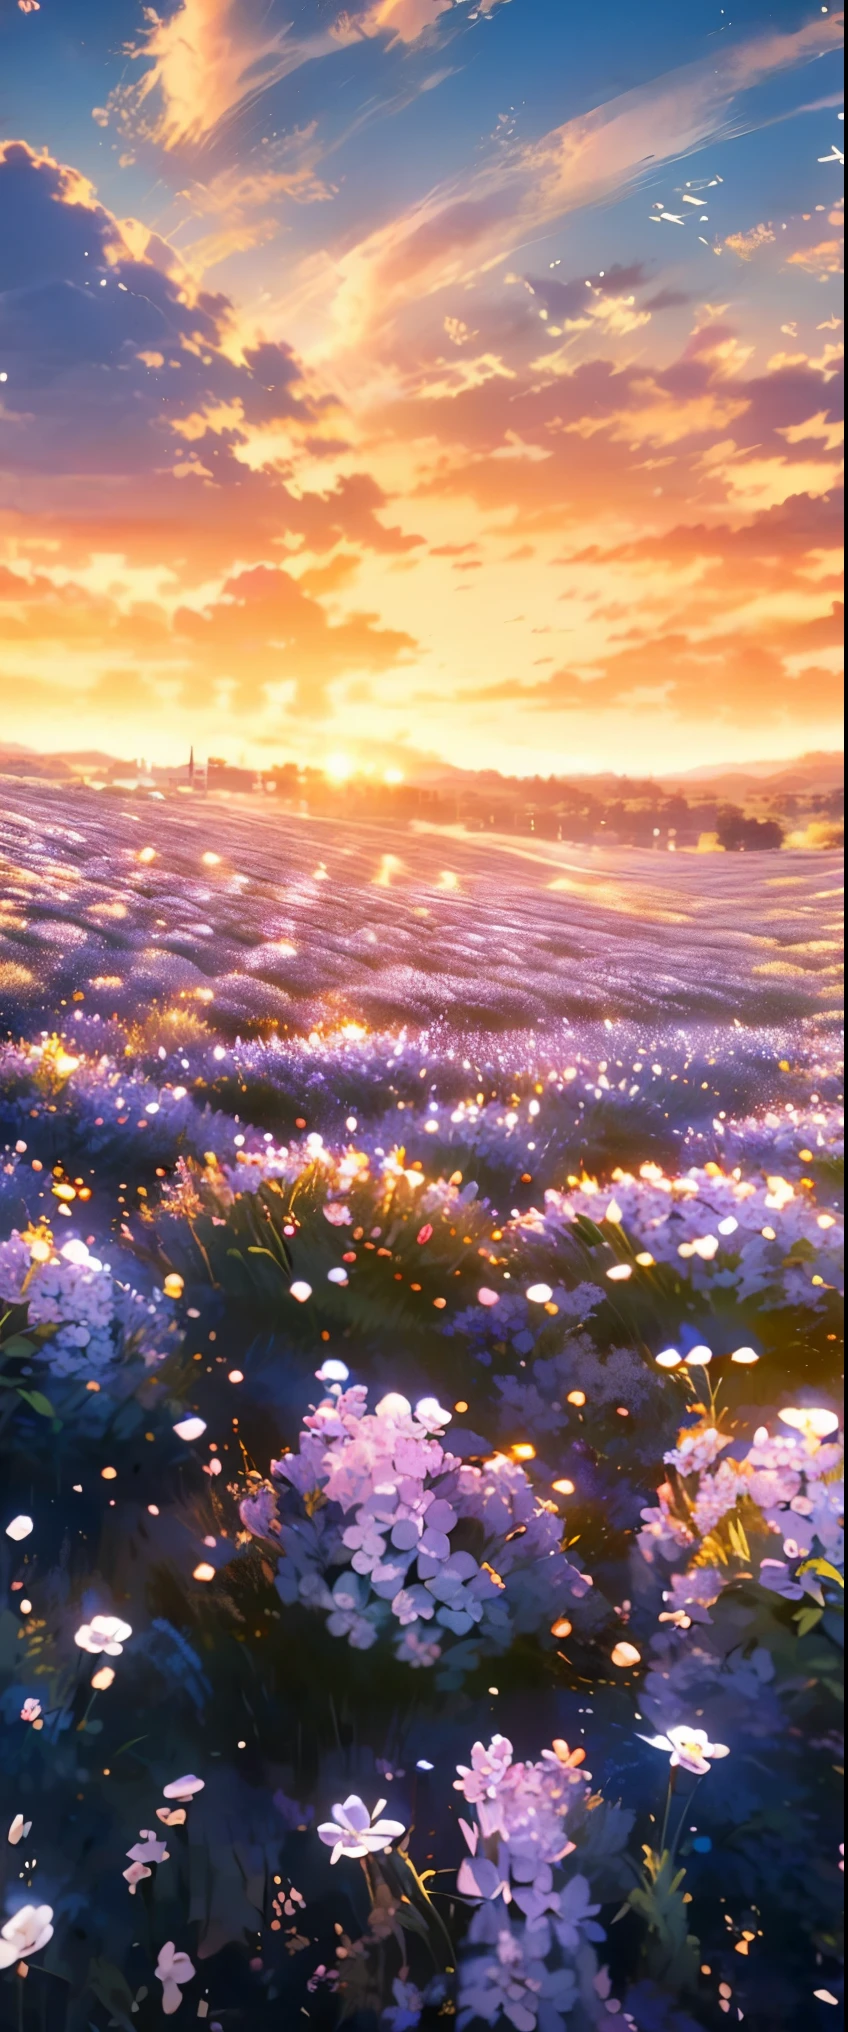 ((masterpiece, highest quality, Highest image quality, High resolution, photorealistic, Raw photo, 8K)), a field of purple flowers with the sun setting in the background, really beautiful nature, lilac sunrays, lavender fields in full bloom, beautiful nature, violet sky, purple beautiful sky, purple sunset, violet and yellow sunset, incredibly beautiful, in a lavender field in france, at purple sunset, beautiful place, field of fantasy flowers, purple sun, field of flowers, 